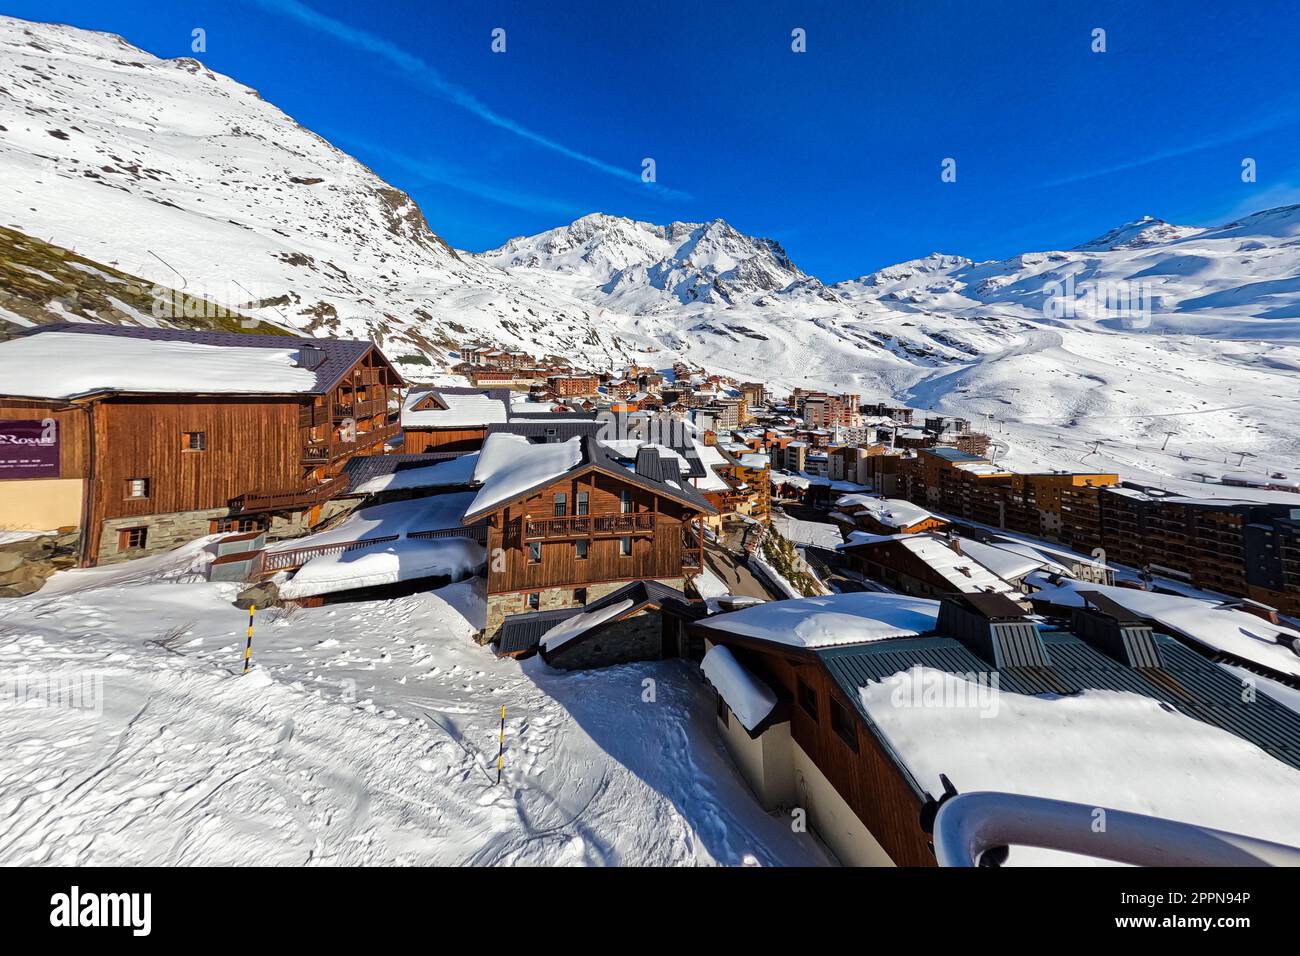 Snow-covered rooftops in the town of Val Thorens, a ski resort in the French Alps surrounded by high peaks Stock Photo